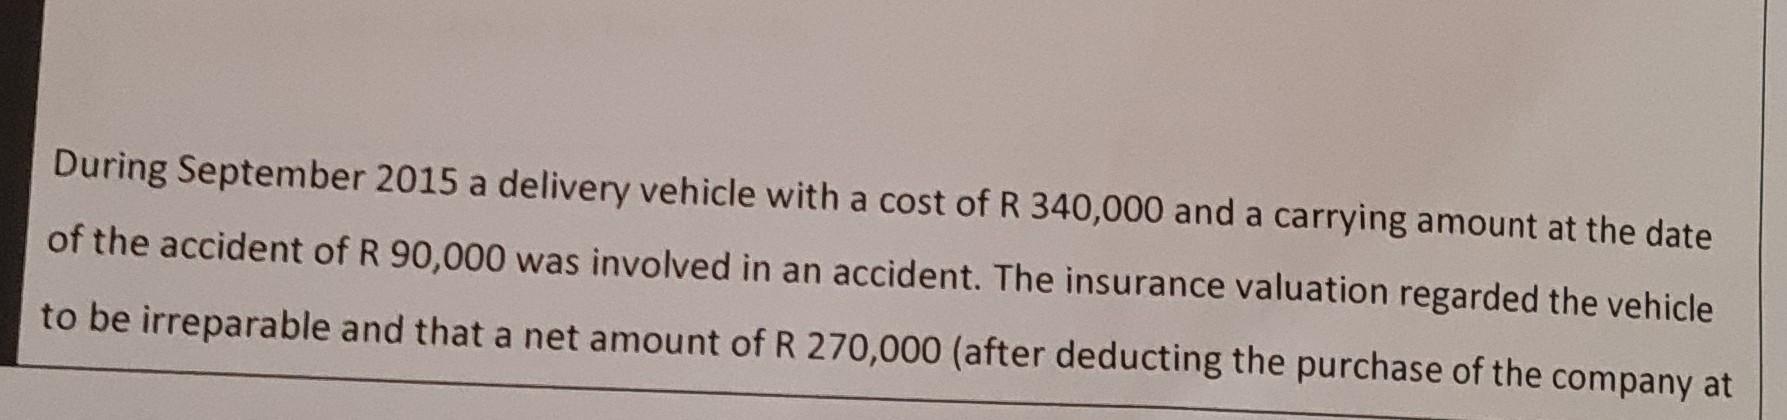 During September 2015 a delivery vehicle with a cost of R 340,000 and a carrying amount at the dateof the accident of R 90,0